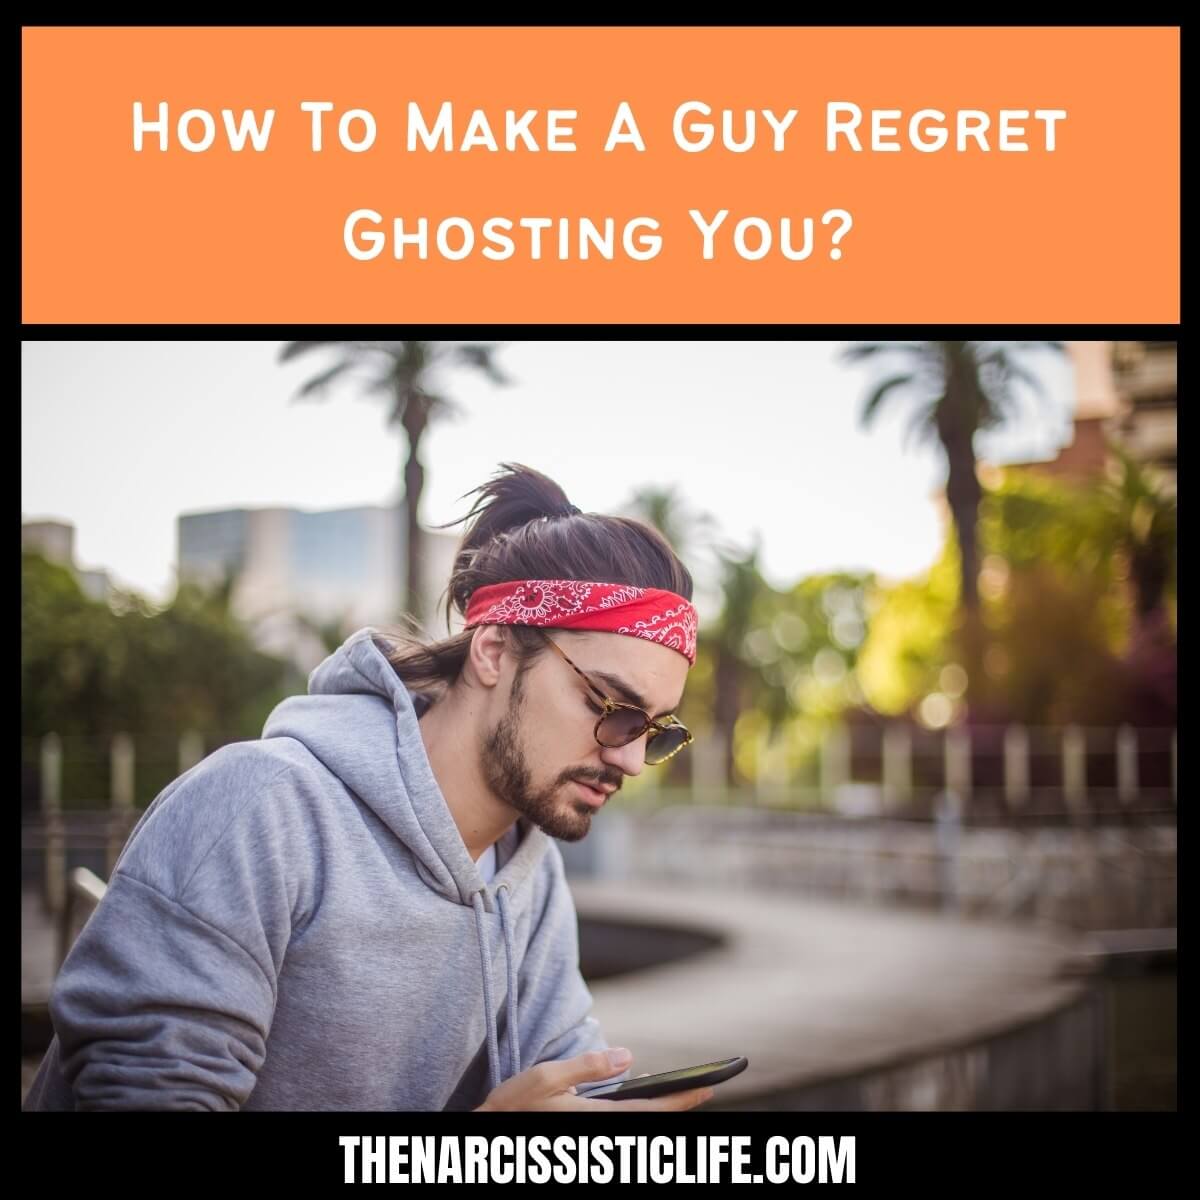 How To Make A Guy Regret Ghosting You? - The Narcissistic Life